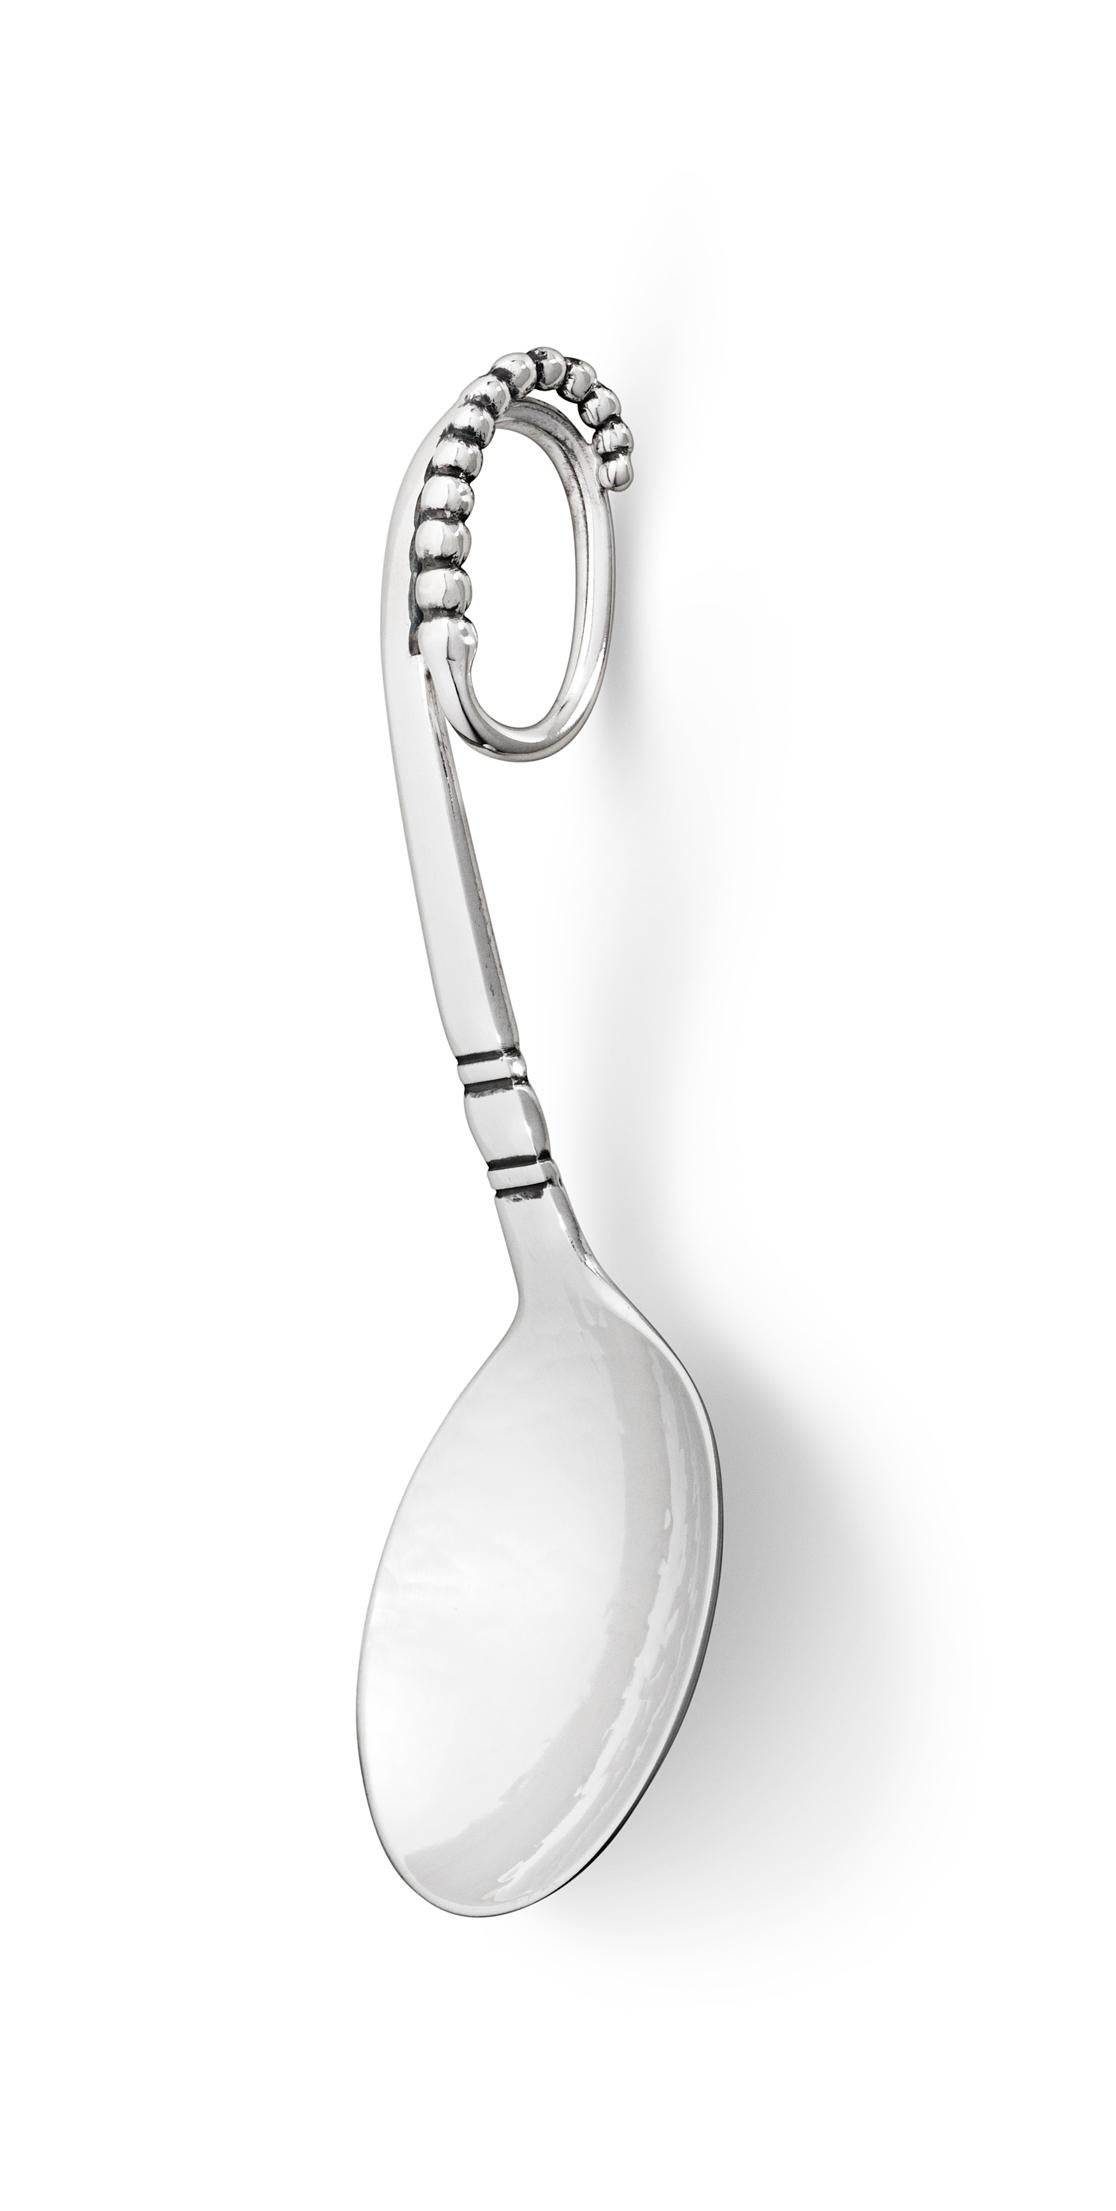 Designed by Vivianna Torun Bülow-Hübe in 1994, this series of children’s cutlery in sterling silver was inspired by Vivianna’s early childhood in Sweden. She explains, “When I behaved well as a child, I was rewarded with something tasty to eat.